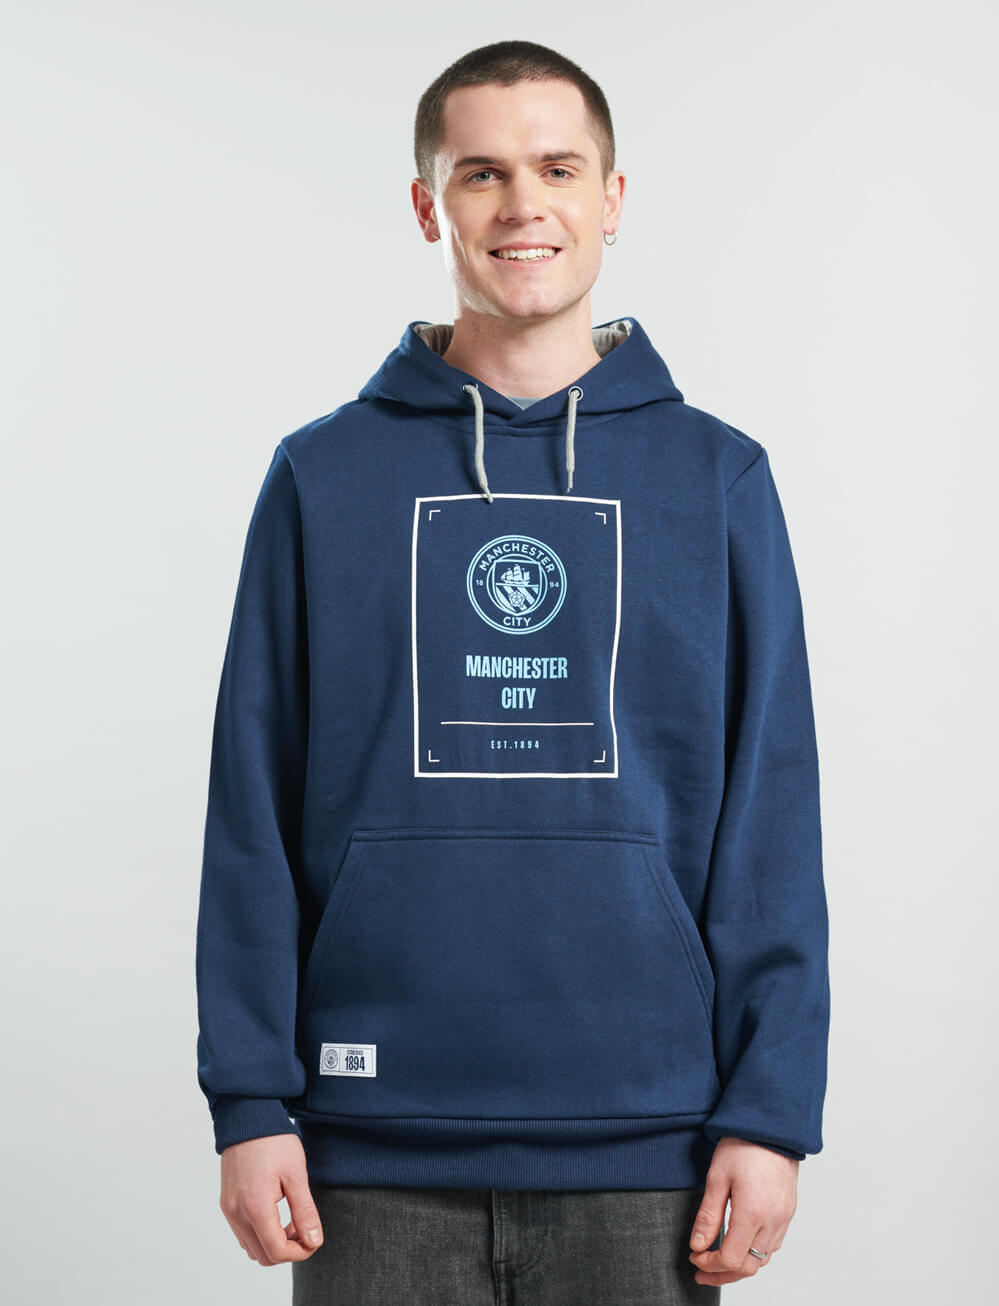 Official Manchester City Crest Hoodie - Navy - The World Football Store